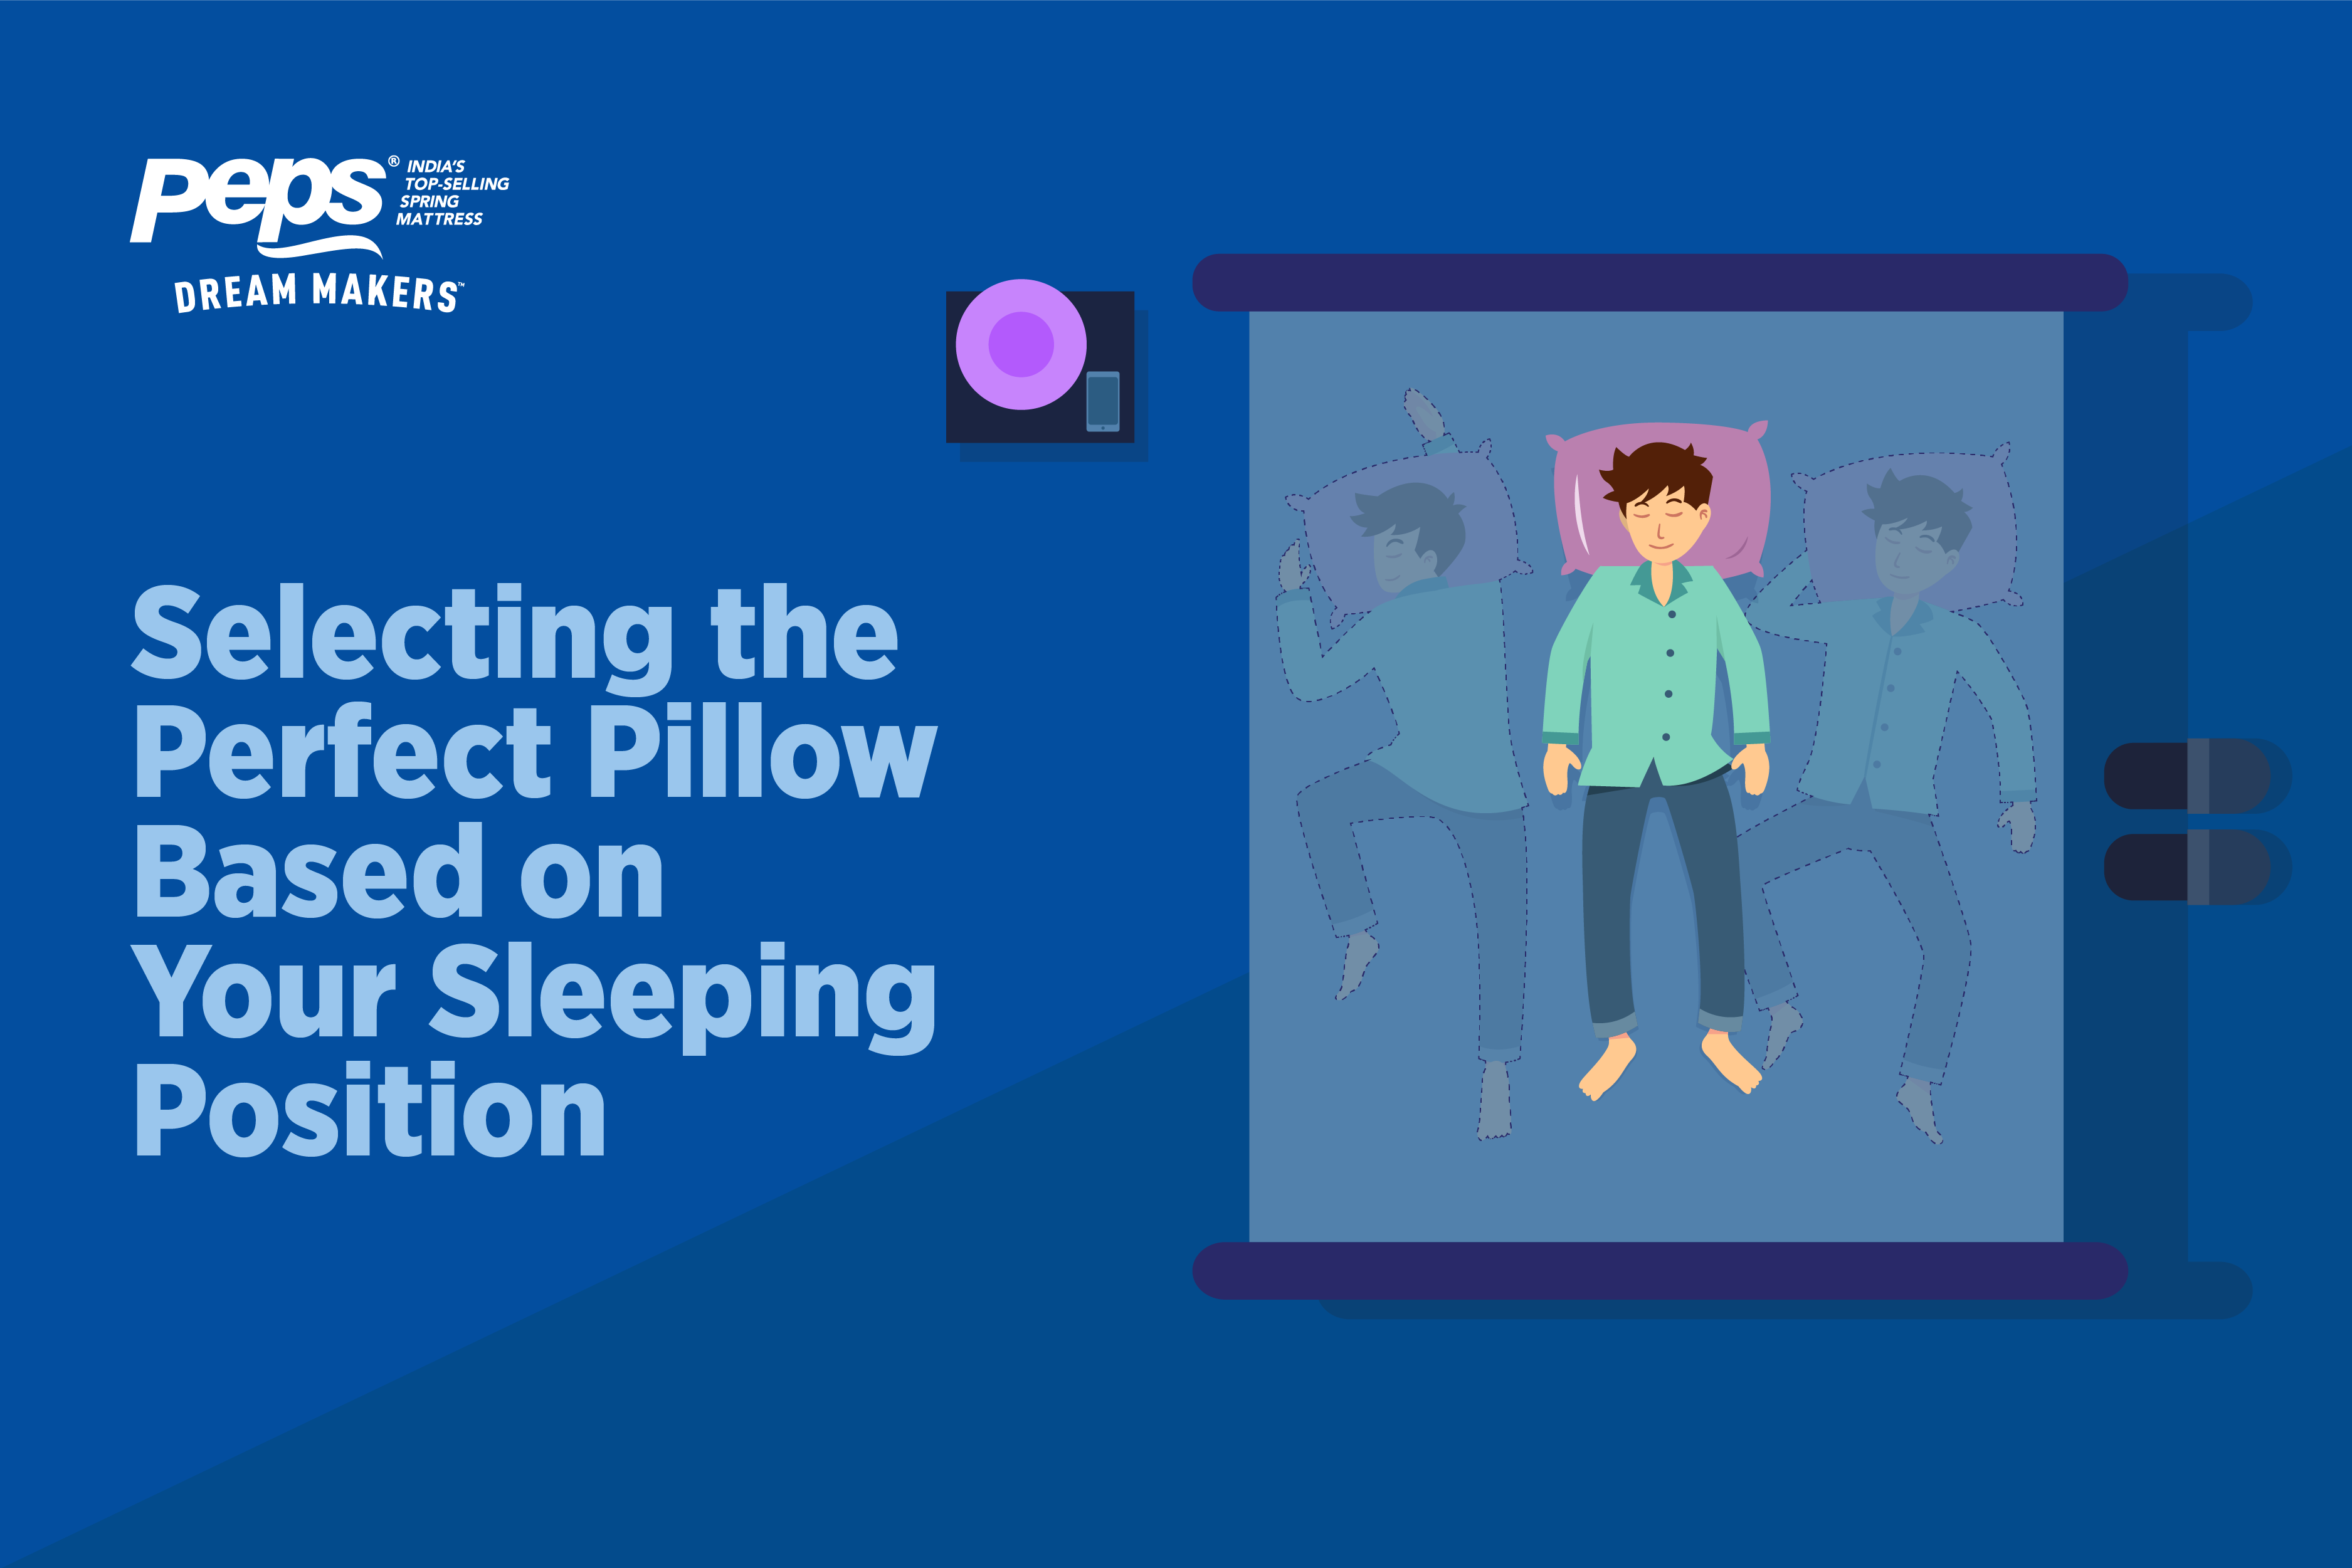 Selecting the perfect pillow based on your sleeping position